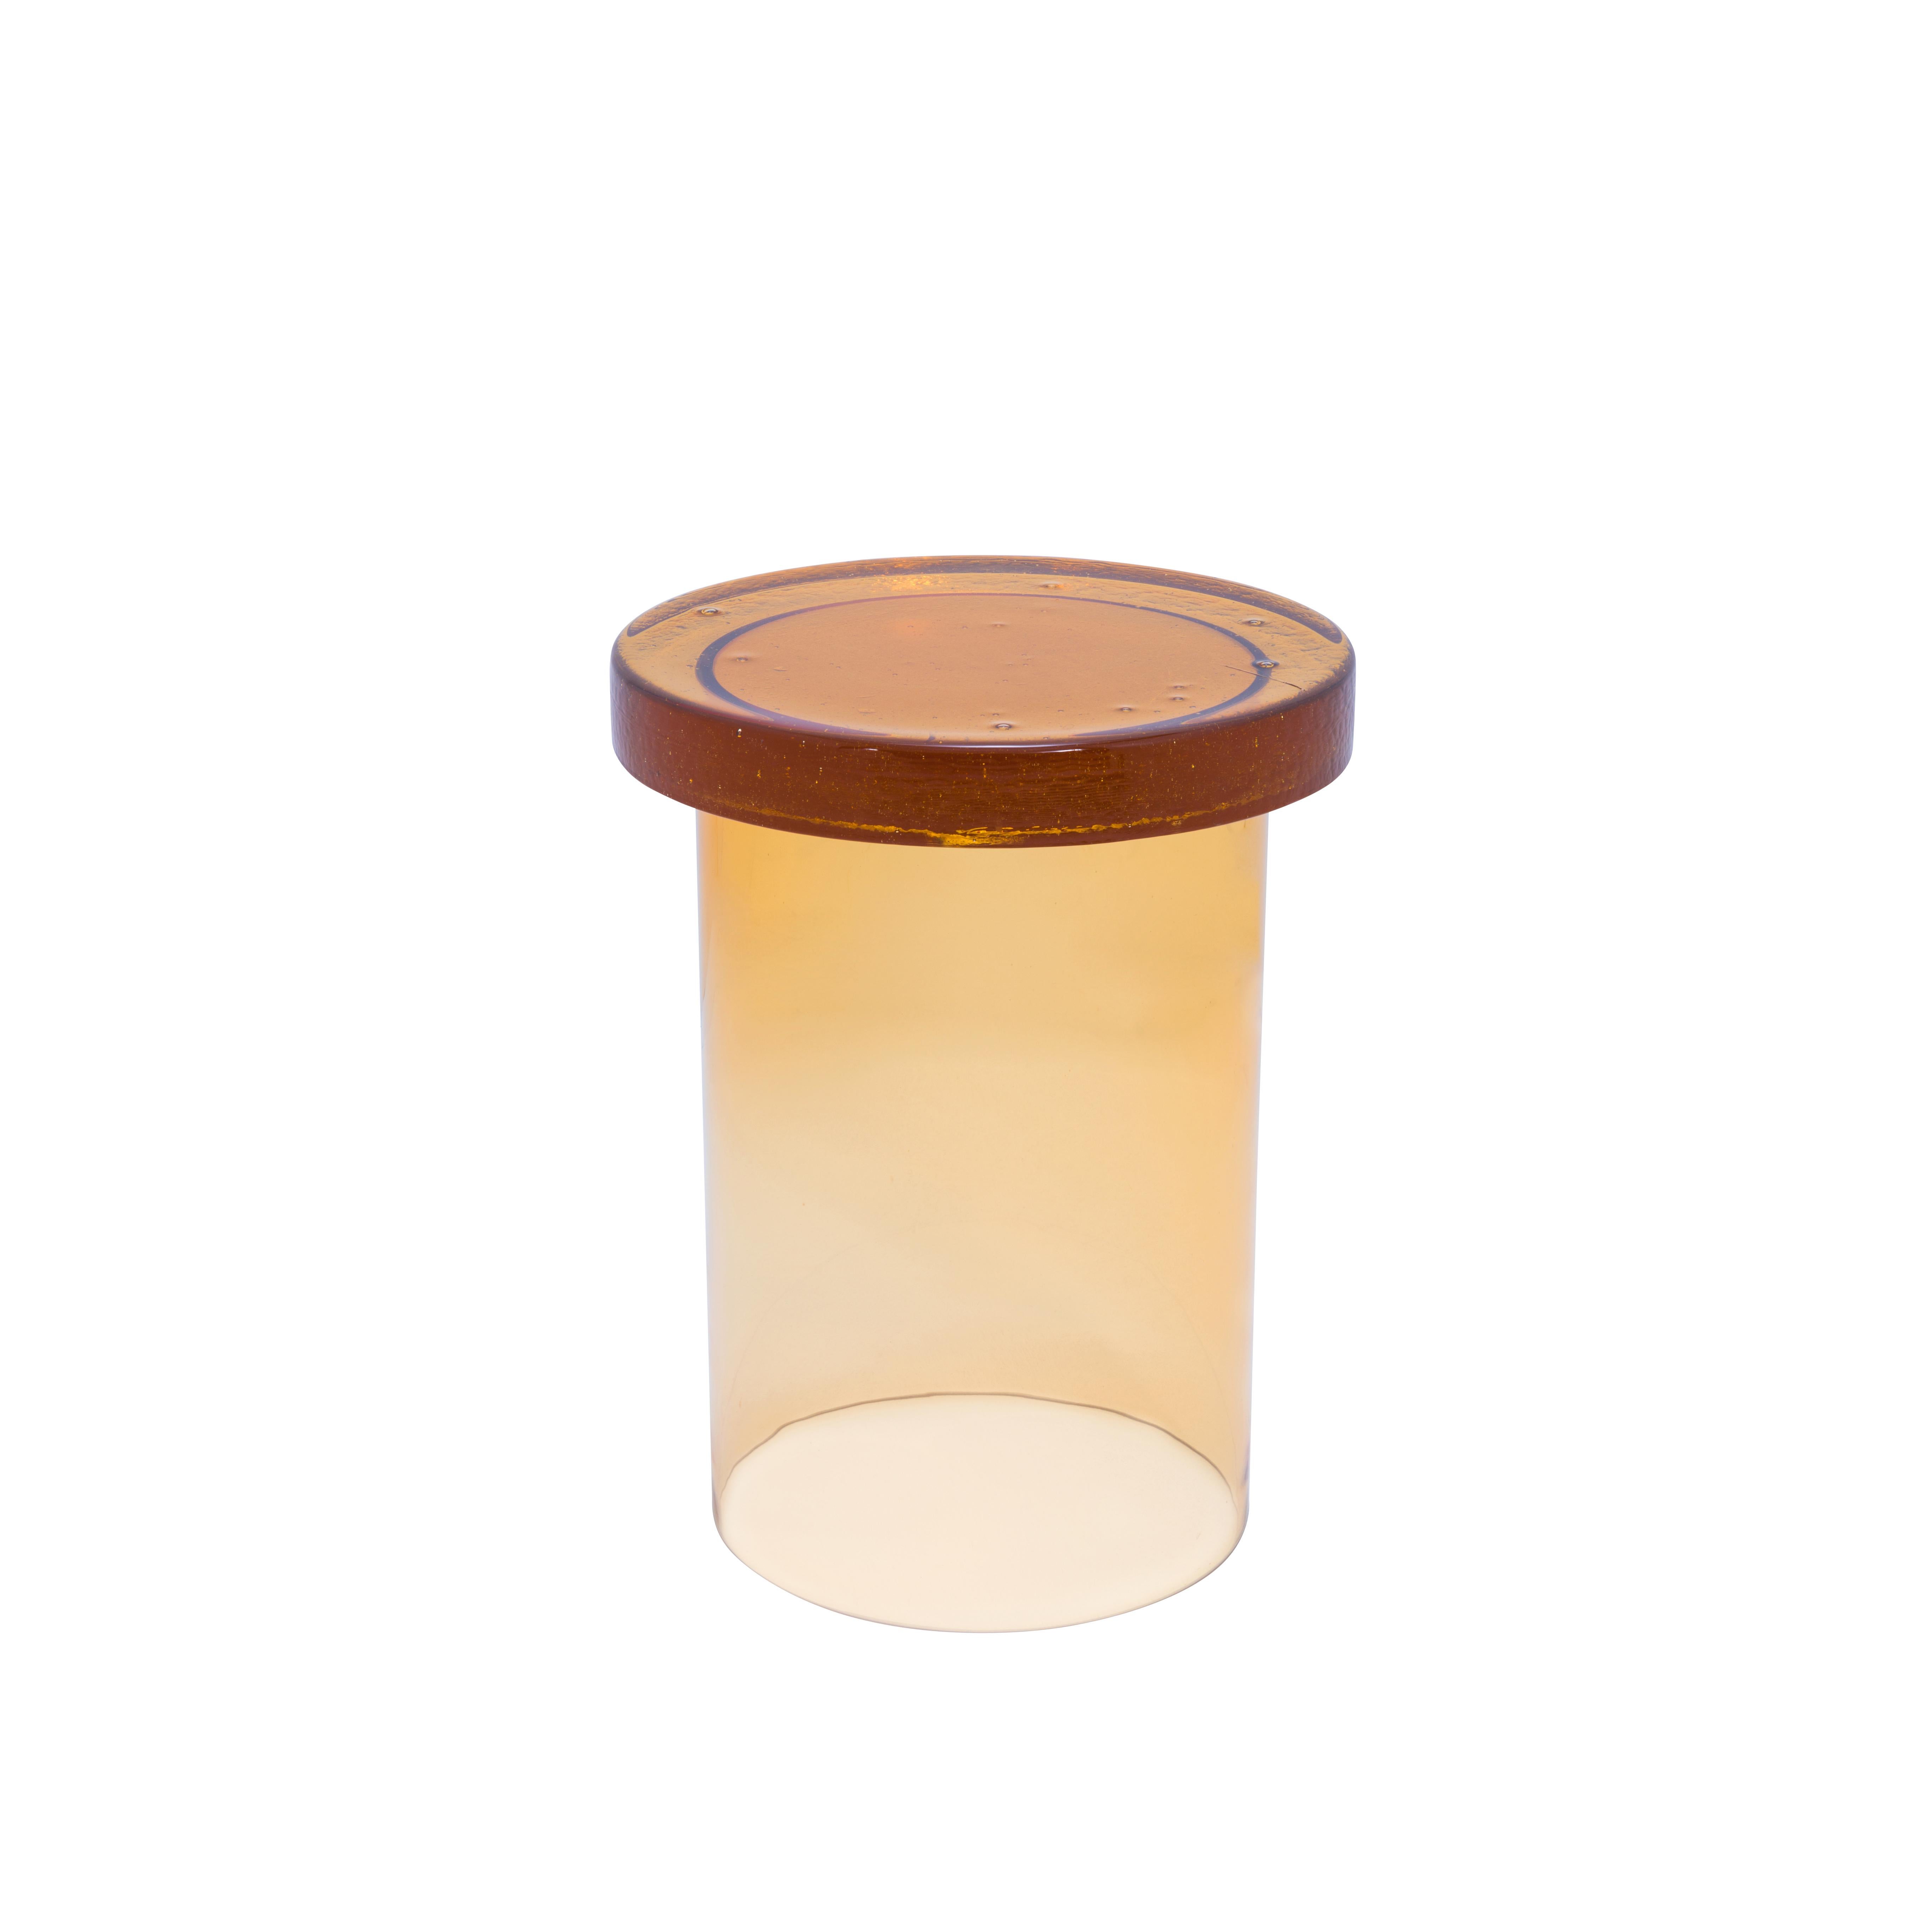 Alwa Three Amber Side Table by Pulpo
Dimensions: D 38 x H 44 cm
Materials: casted and handblown glass
**Also available in different colors.

Usually, glass is regarded as being lightweight with sharp edges. In contrast, Sebastian Herkner’s Alwa is